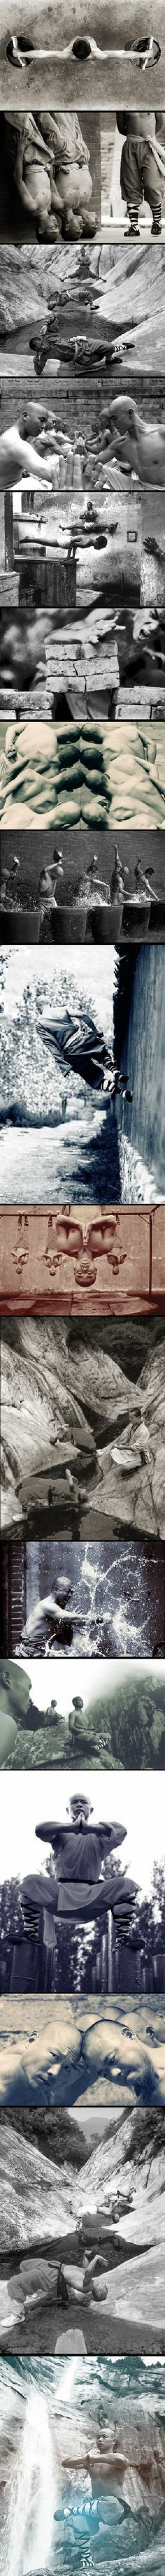 Photos That Witness The Real Strenght Of Monks